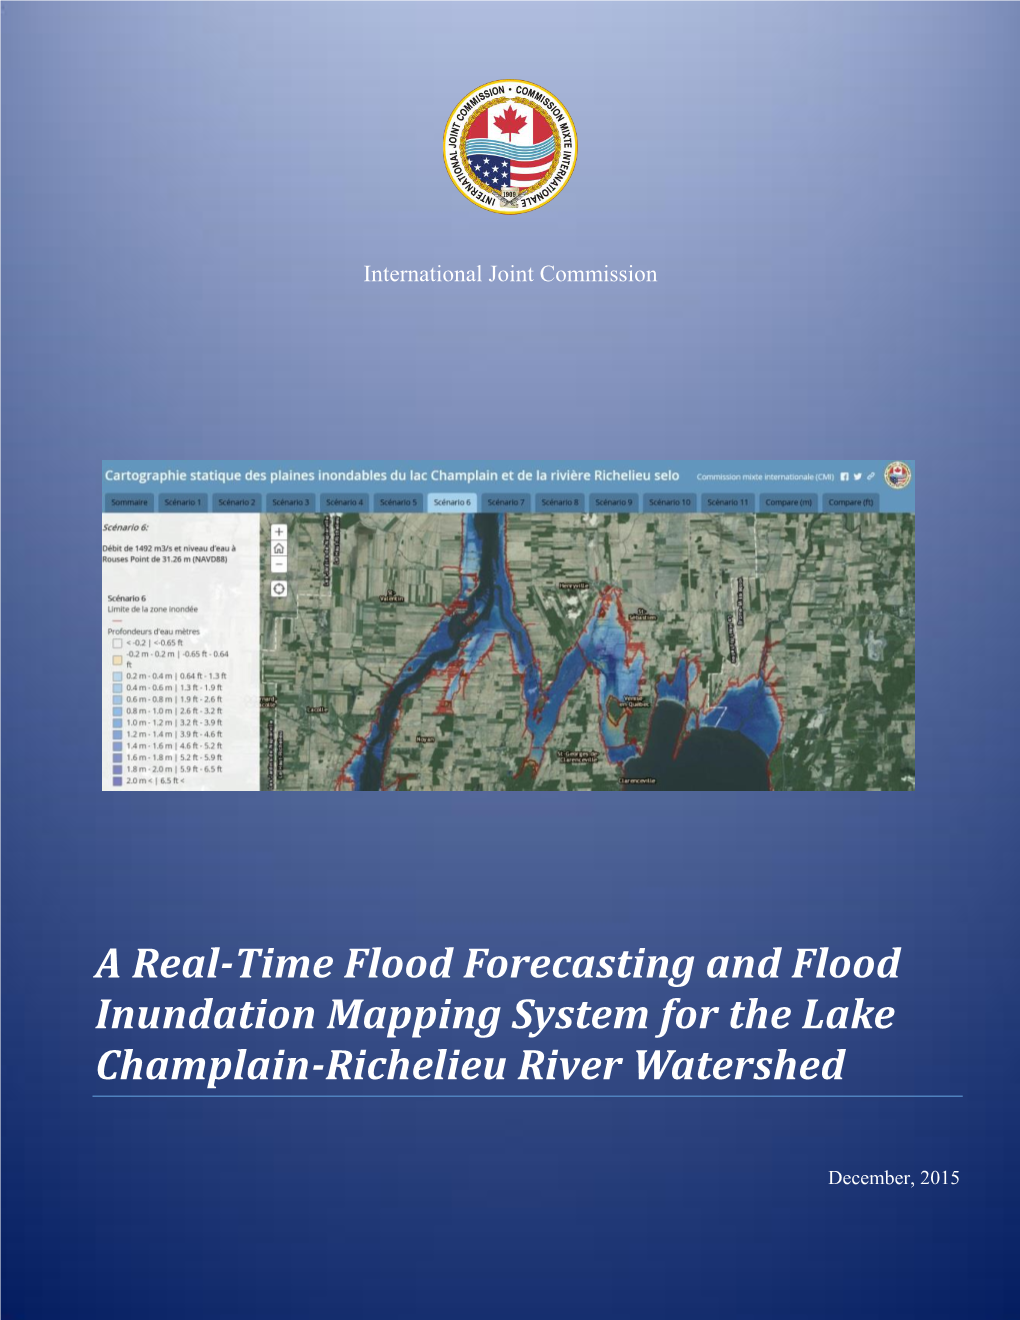 A Real-Time Flood Forecasting and Flood Inundation Mapping System for the Lake Champlain-Richelieu River Watershed